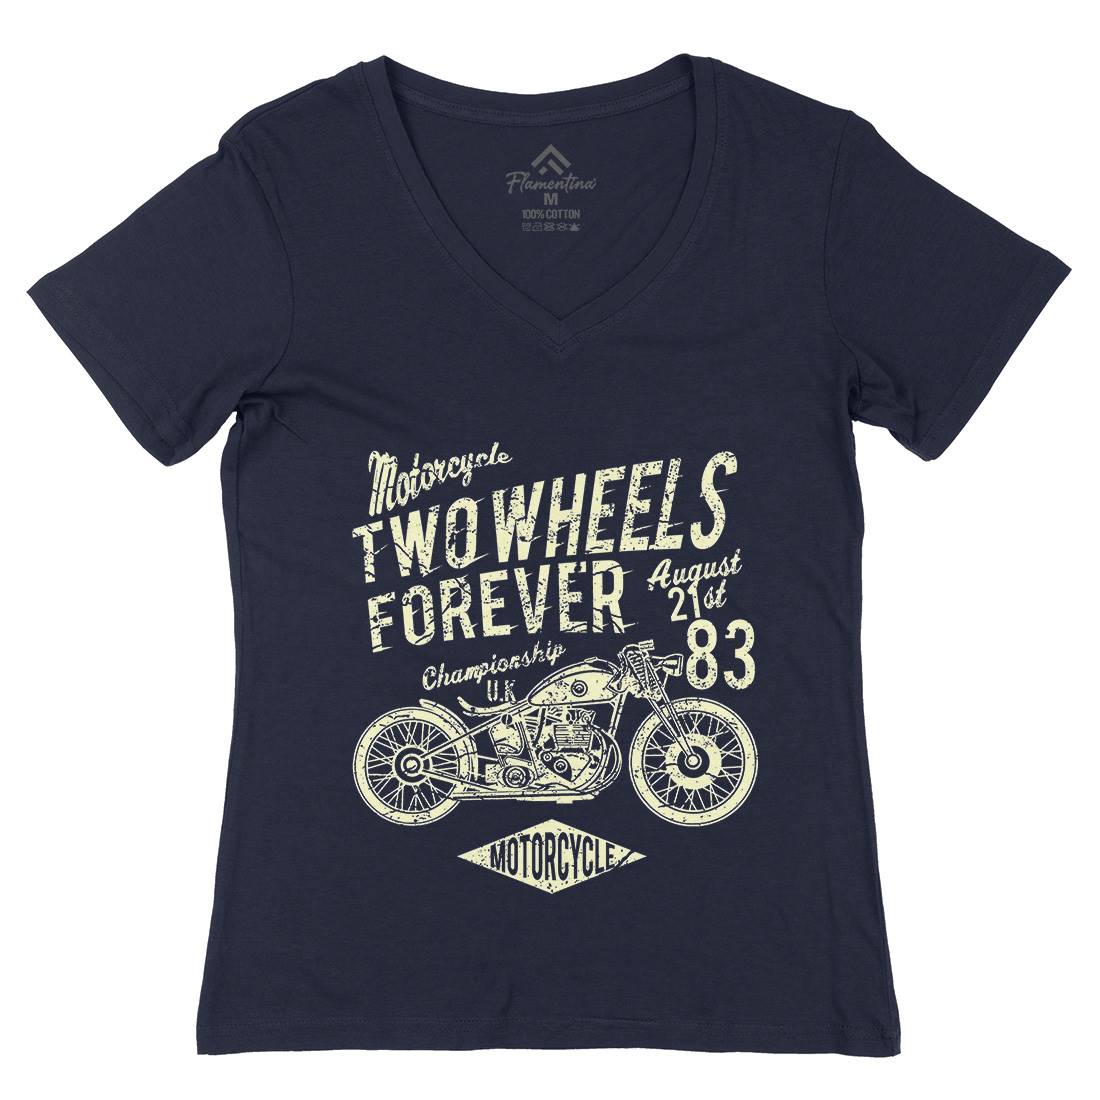 Two Wheels Forever Womens Organic V-Neck T-Shirt Motorcycles A186